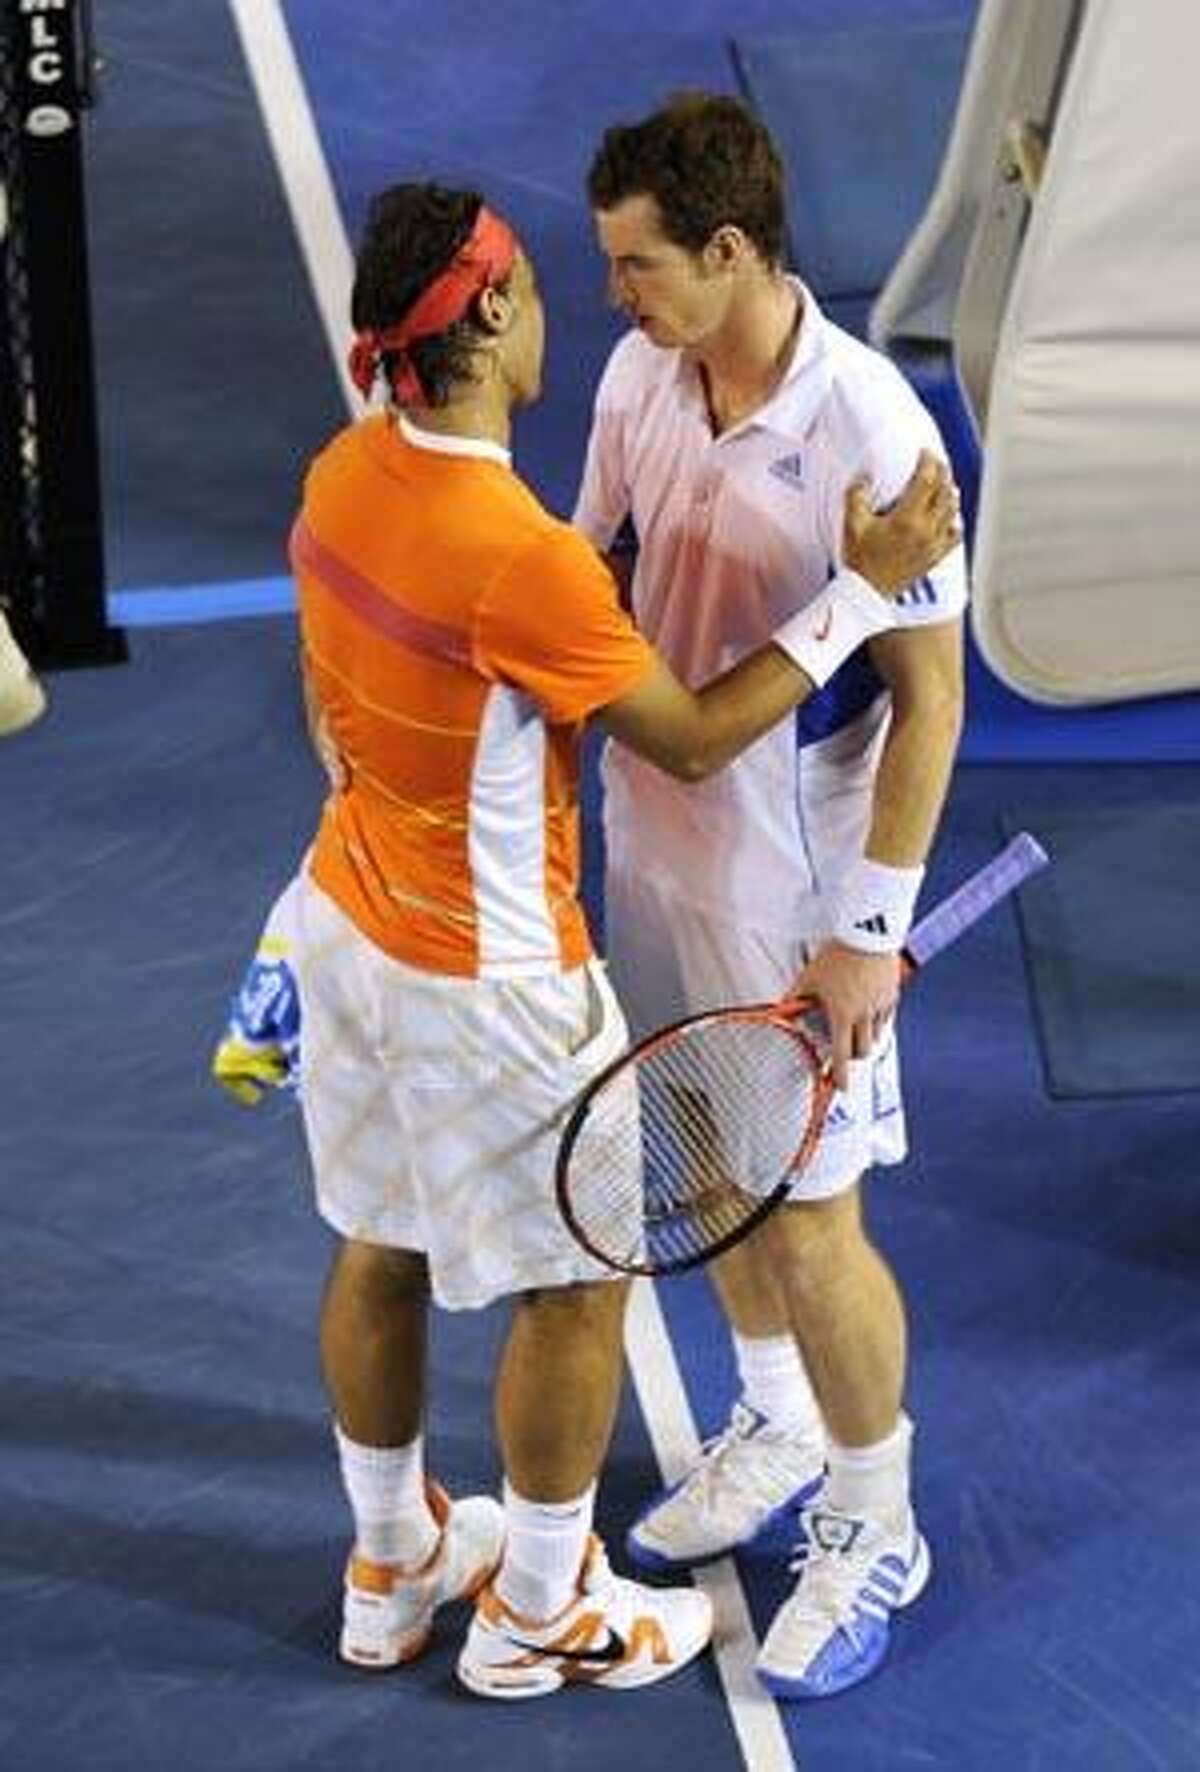 Andy Murray, right, and Rafael Nadal hug each other after Nadal retired injured from their men's singles quarterfinal match Tuesday at the Australian Open in Melbourne, Australia.